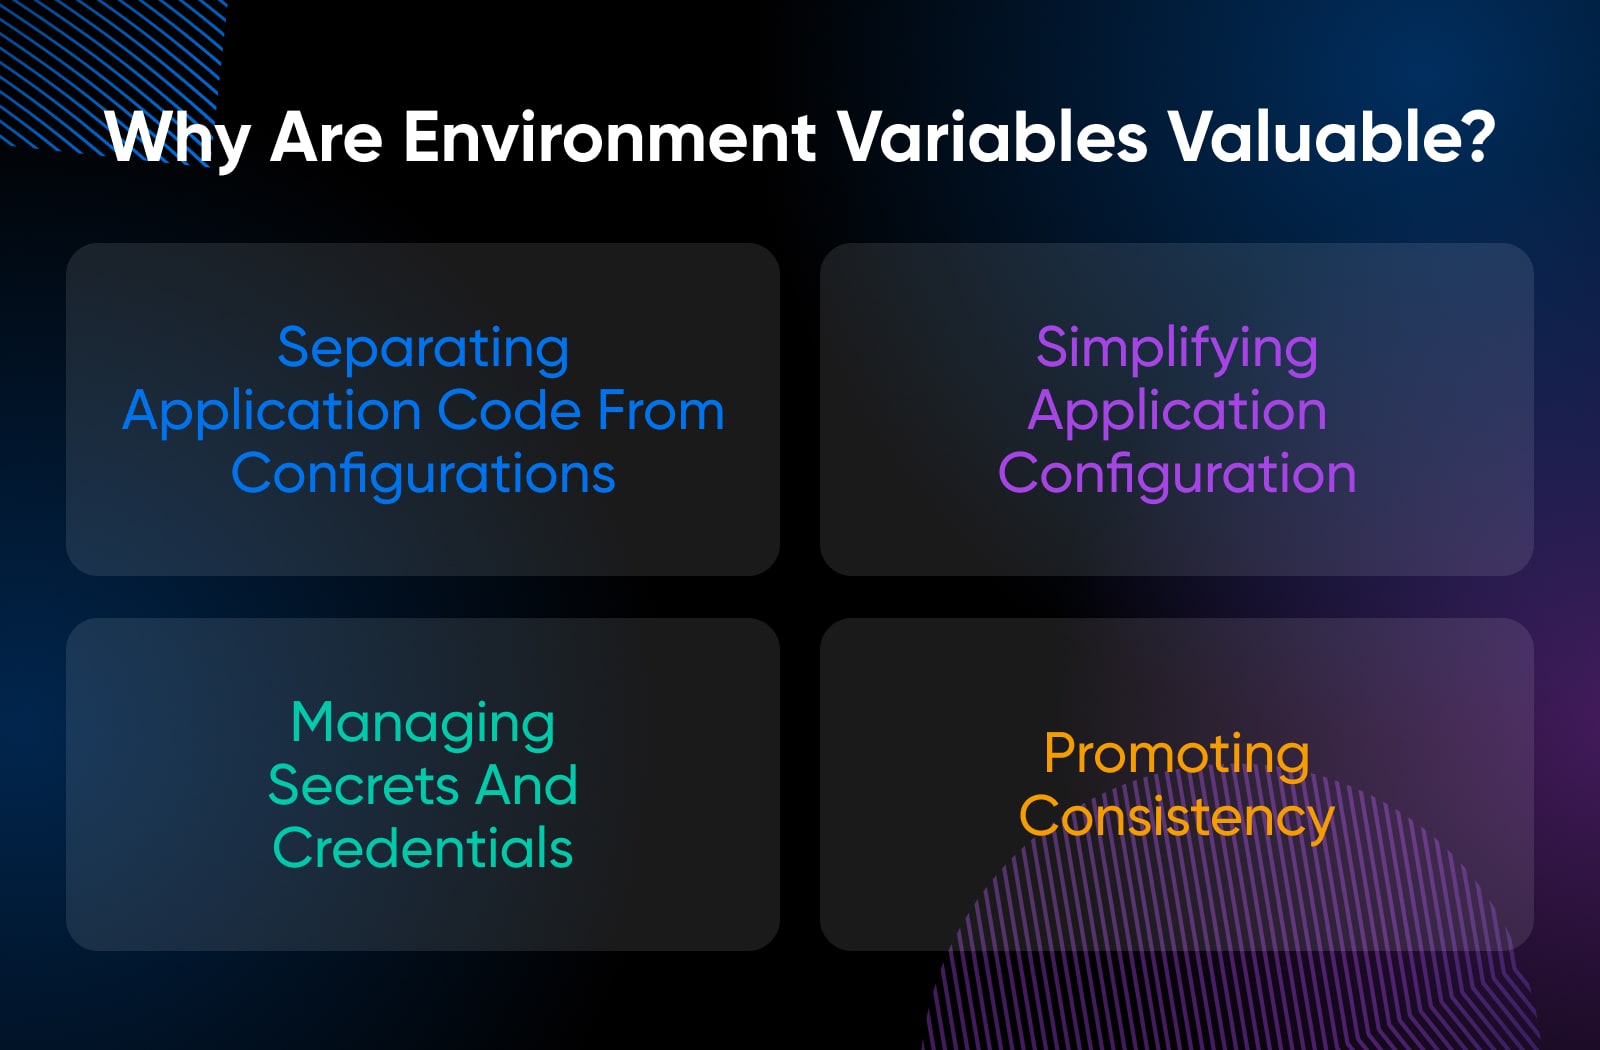 environment variables are valuable to separate application code from configurations, simplify application configuration, manage secrets and credentials, and promote consistenc